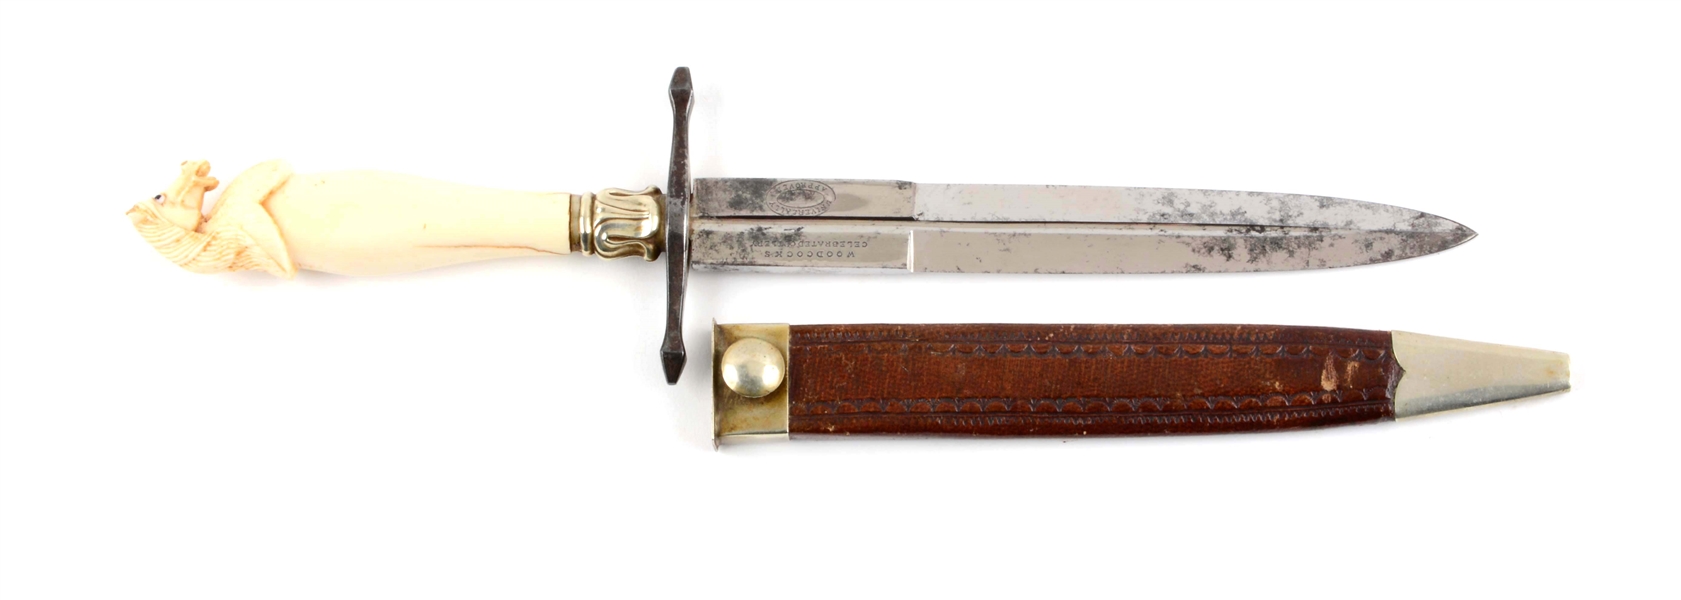 CARVED IVORY HORSEHEAD DOUBLE EDGED BOWIE KNIFE BY WOODCOCK, SHEFFIELD.